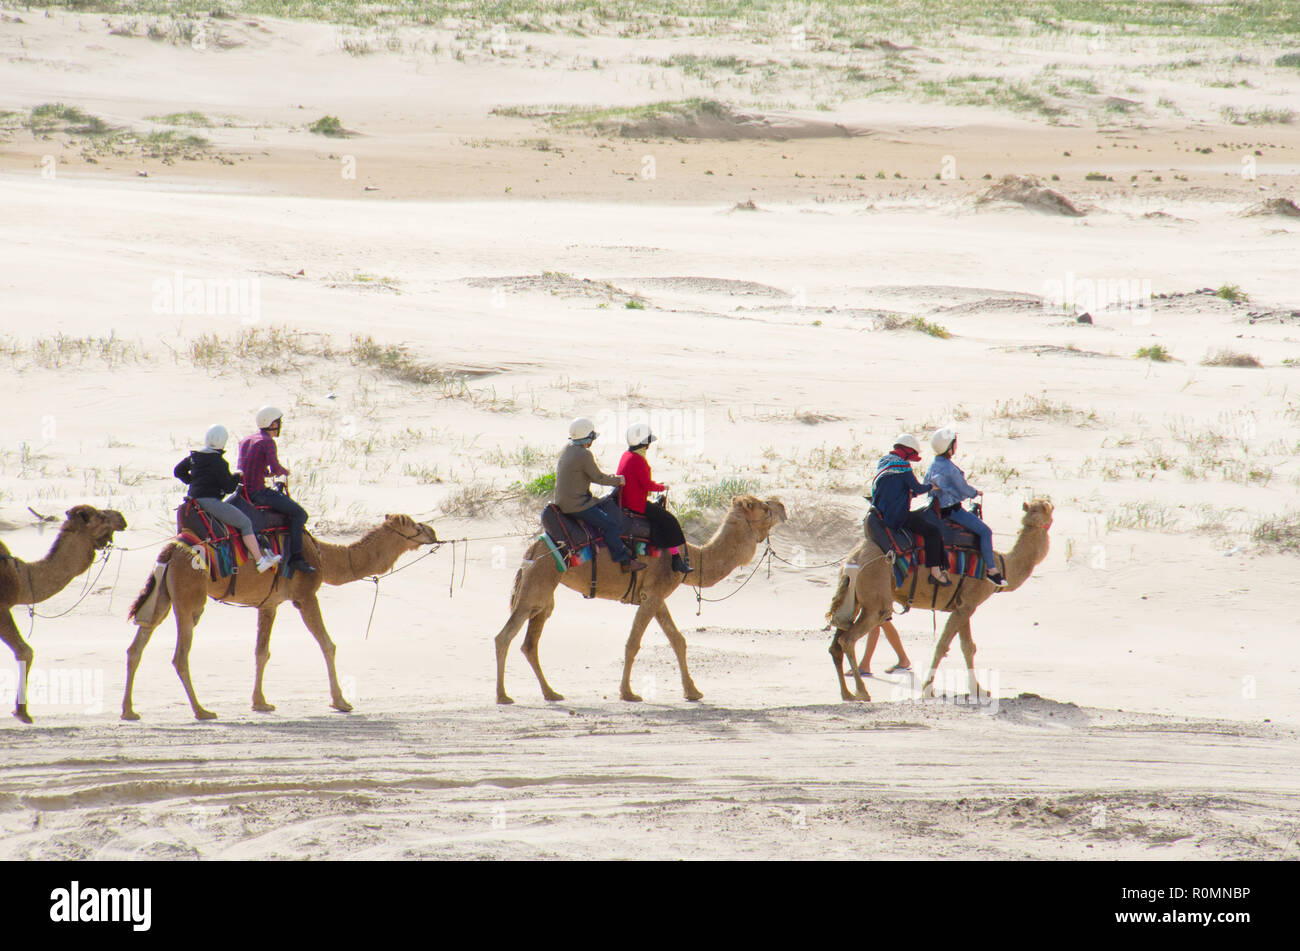 Three couples ride camels across the foreground with barren sandy background. Camel riding a popular tourist activity on Stockton Beach sand dunes. Stock Photo